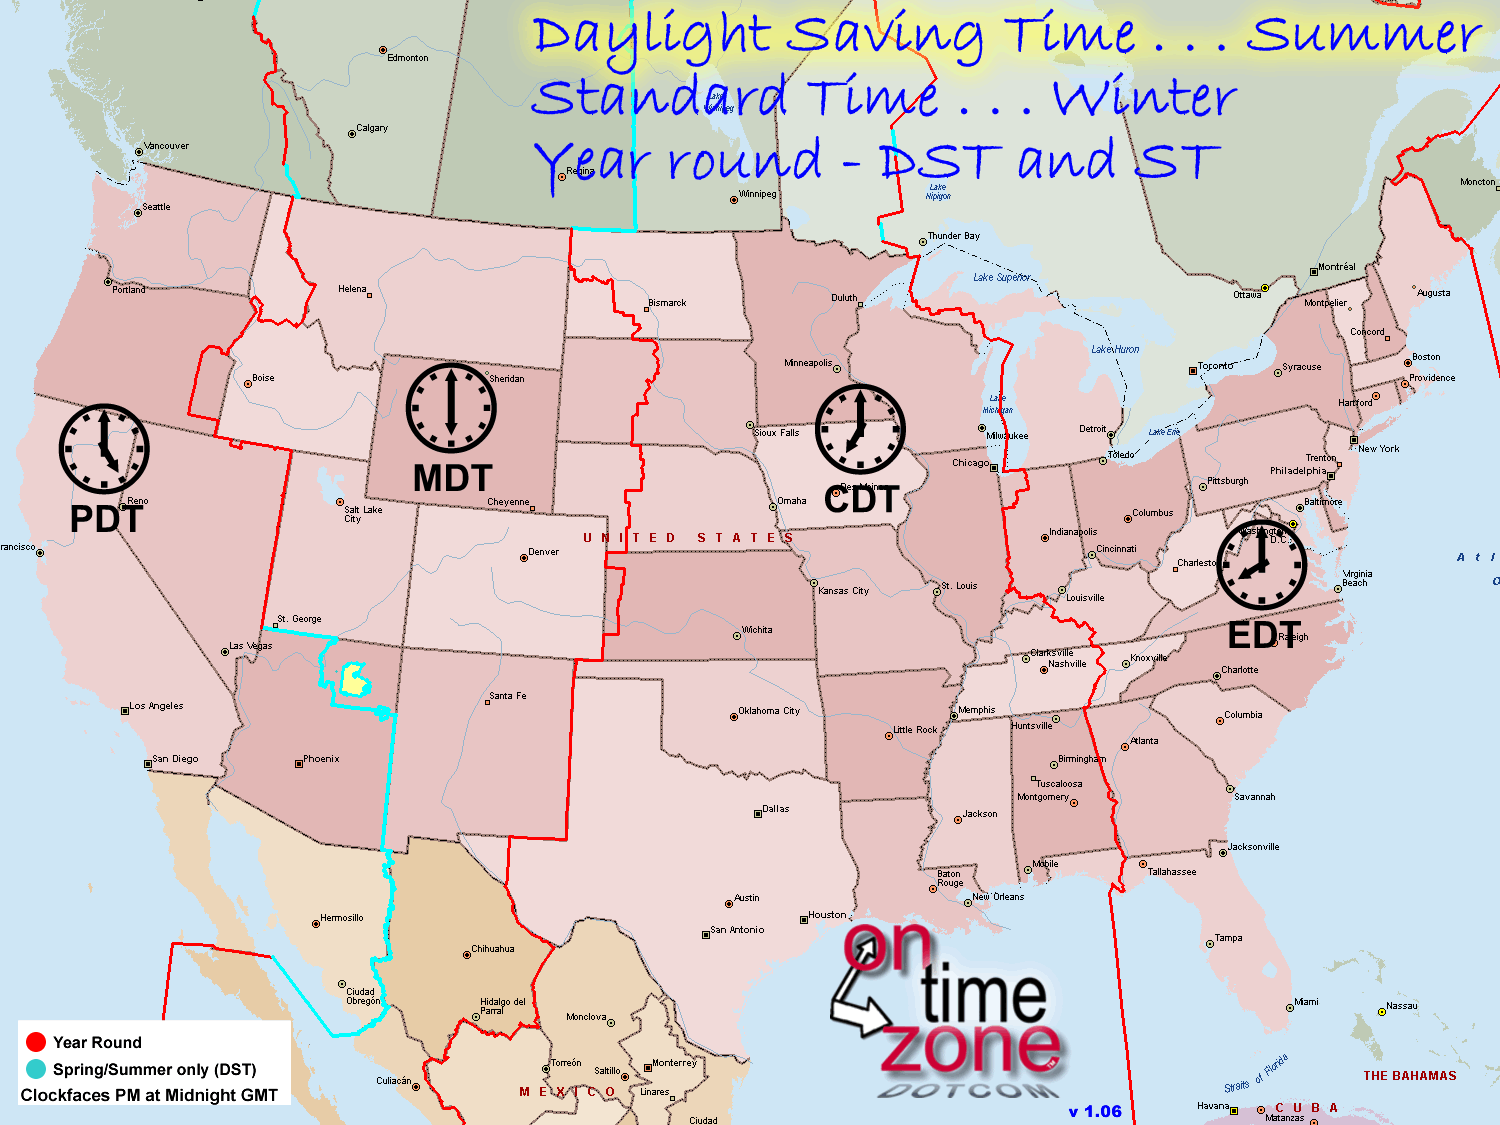 map of usa time zones